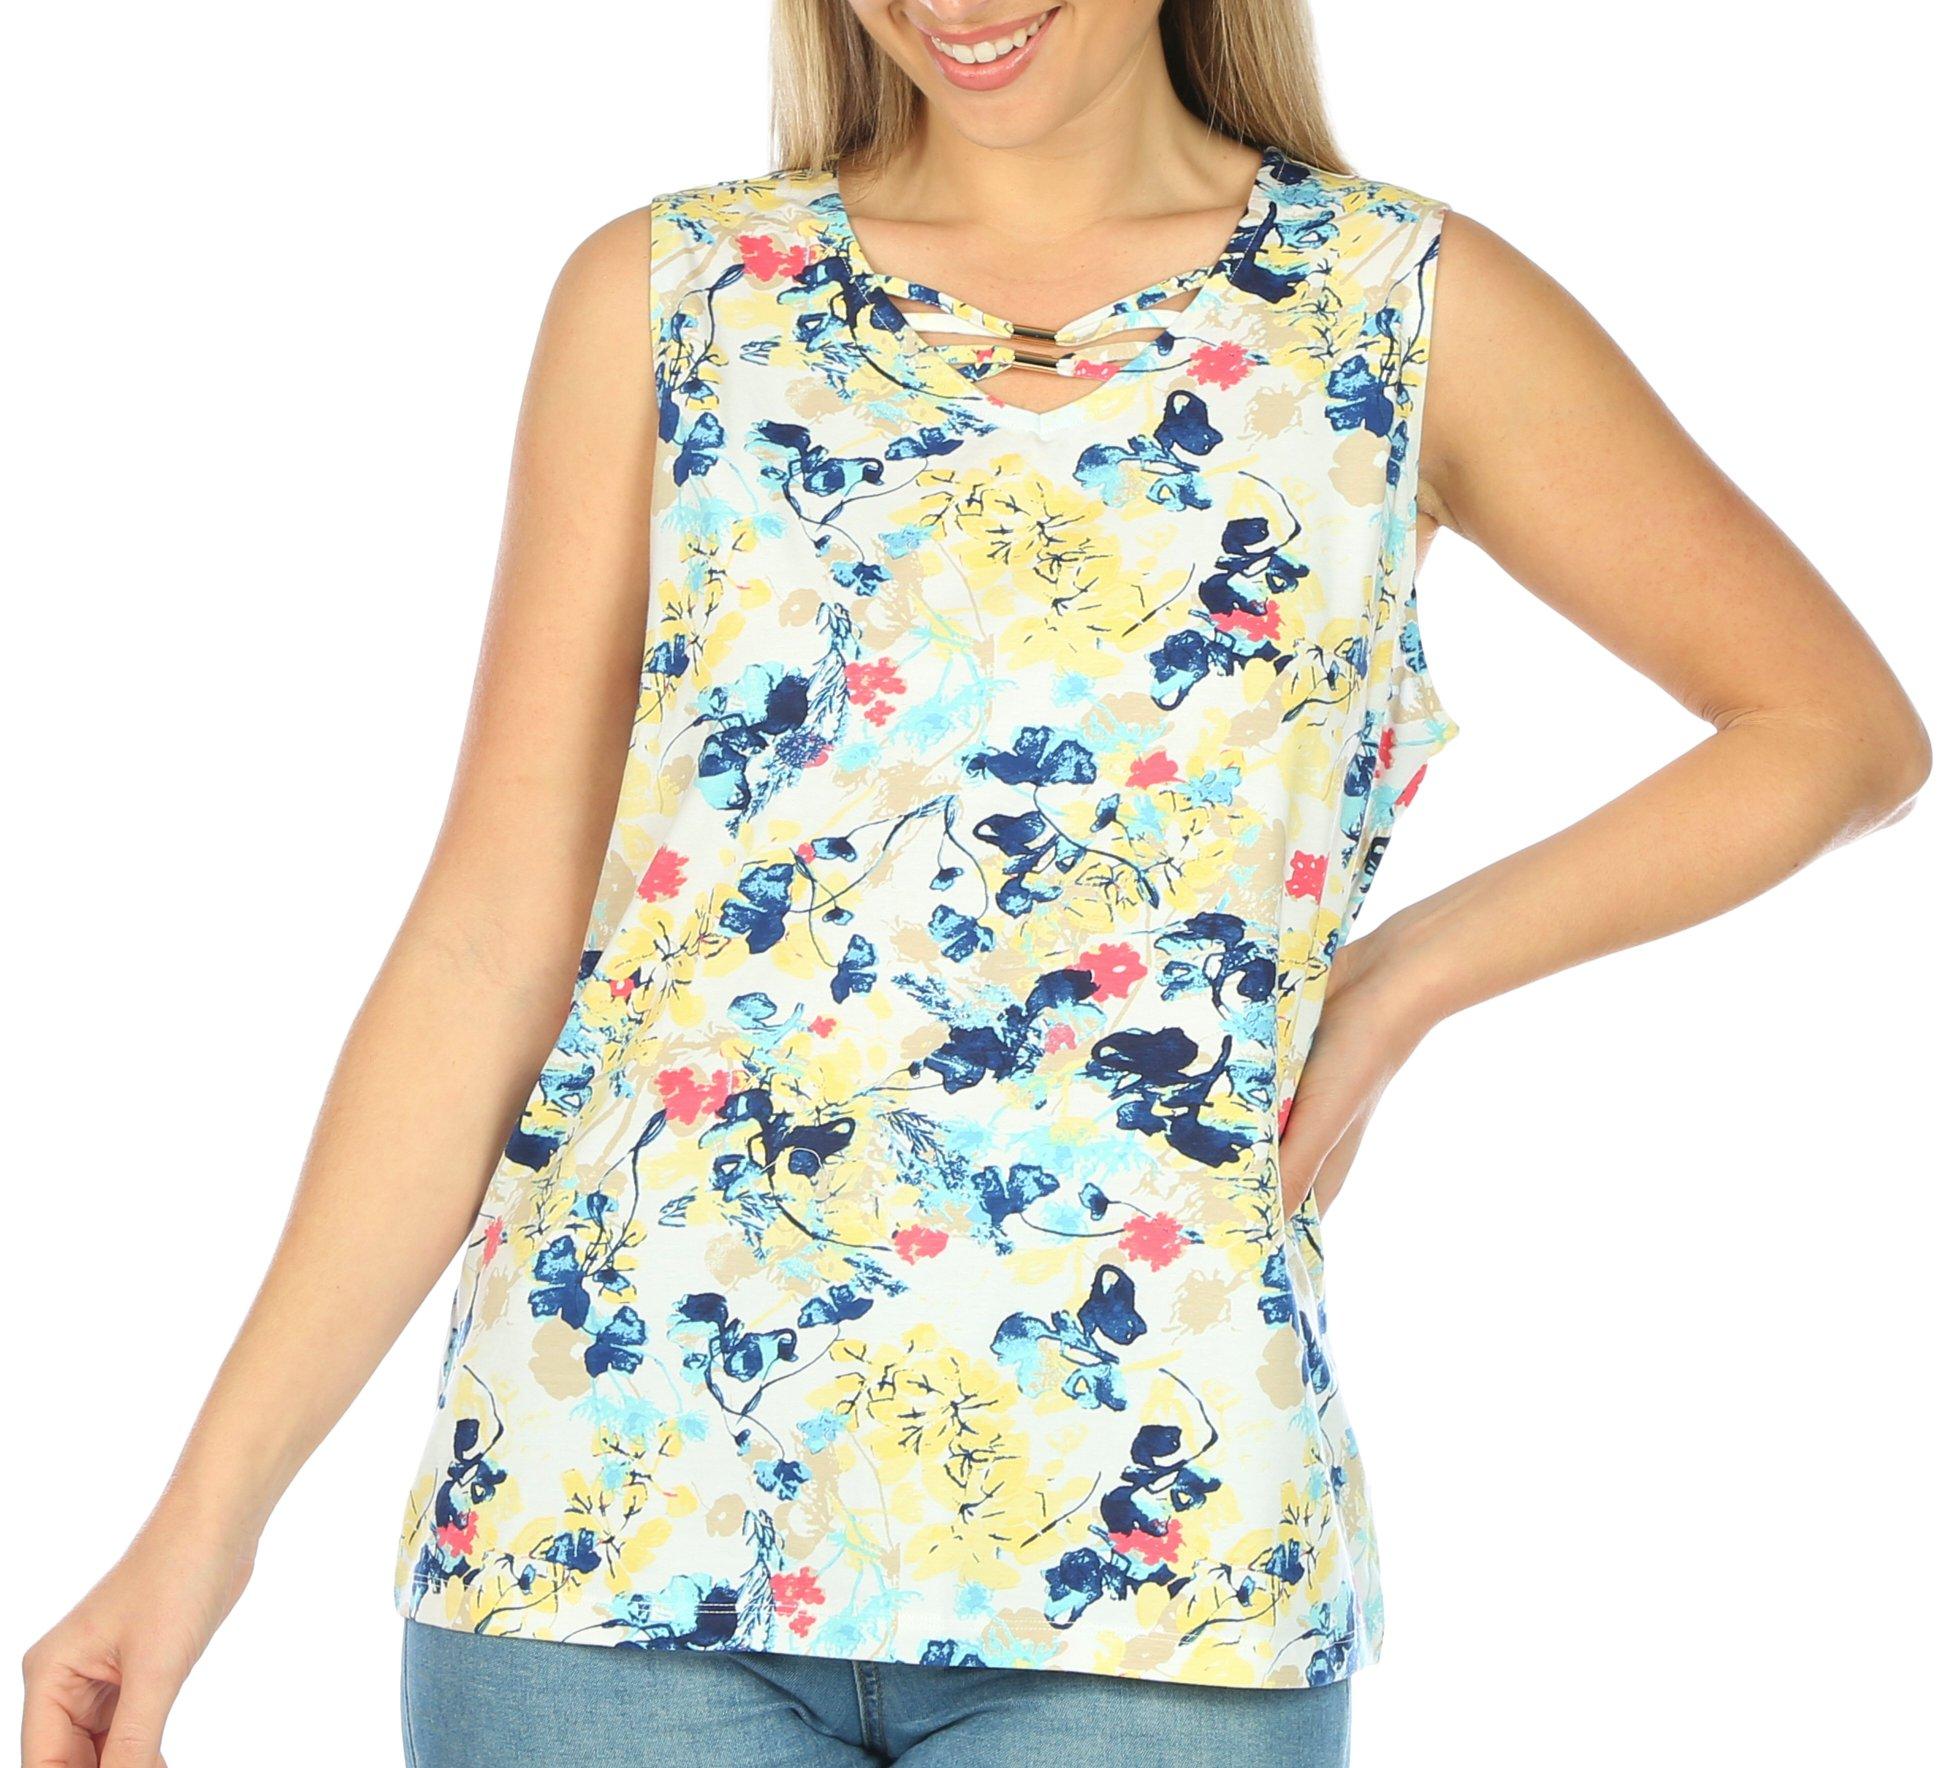 Coral Bay Womens Floral V-Neck Sleeveless Top